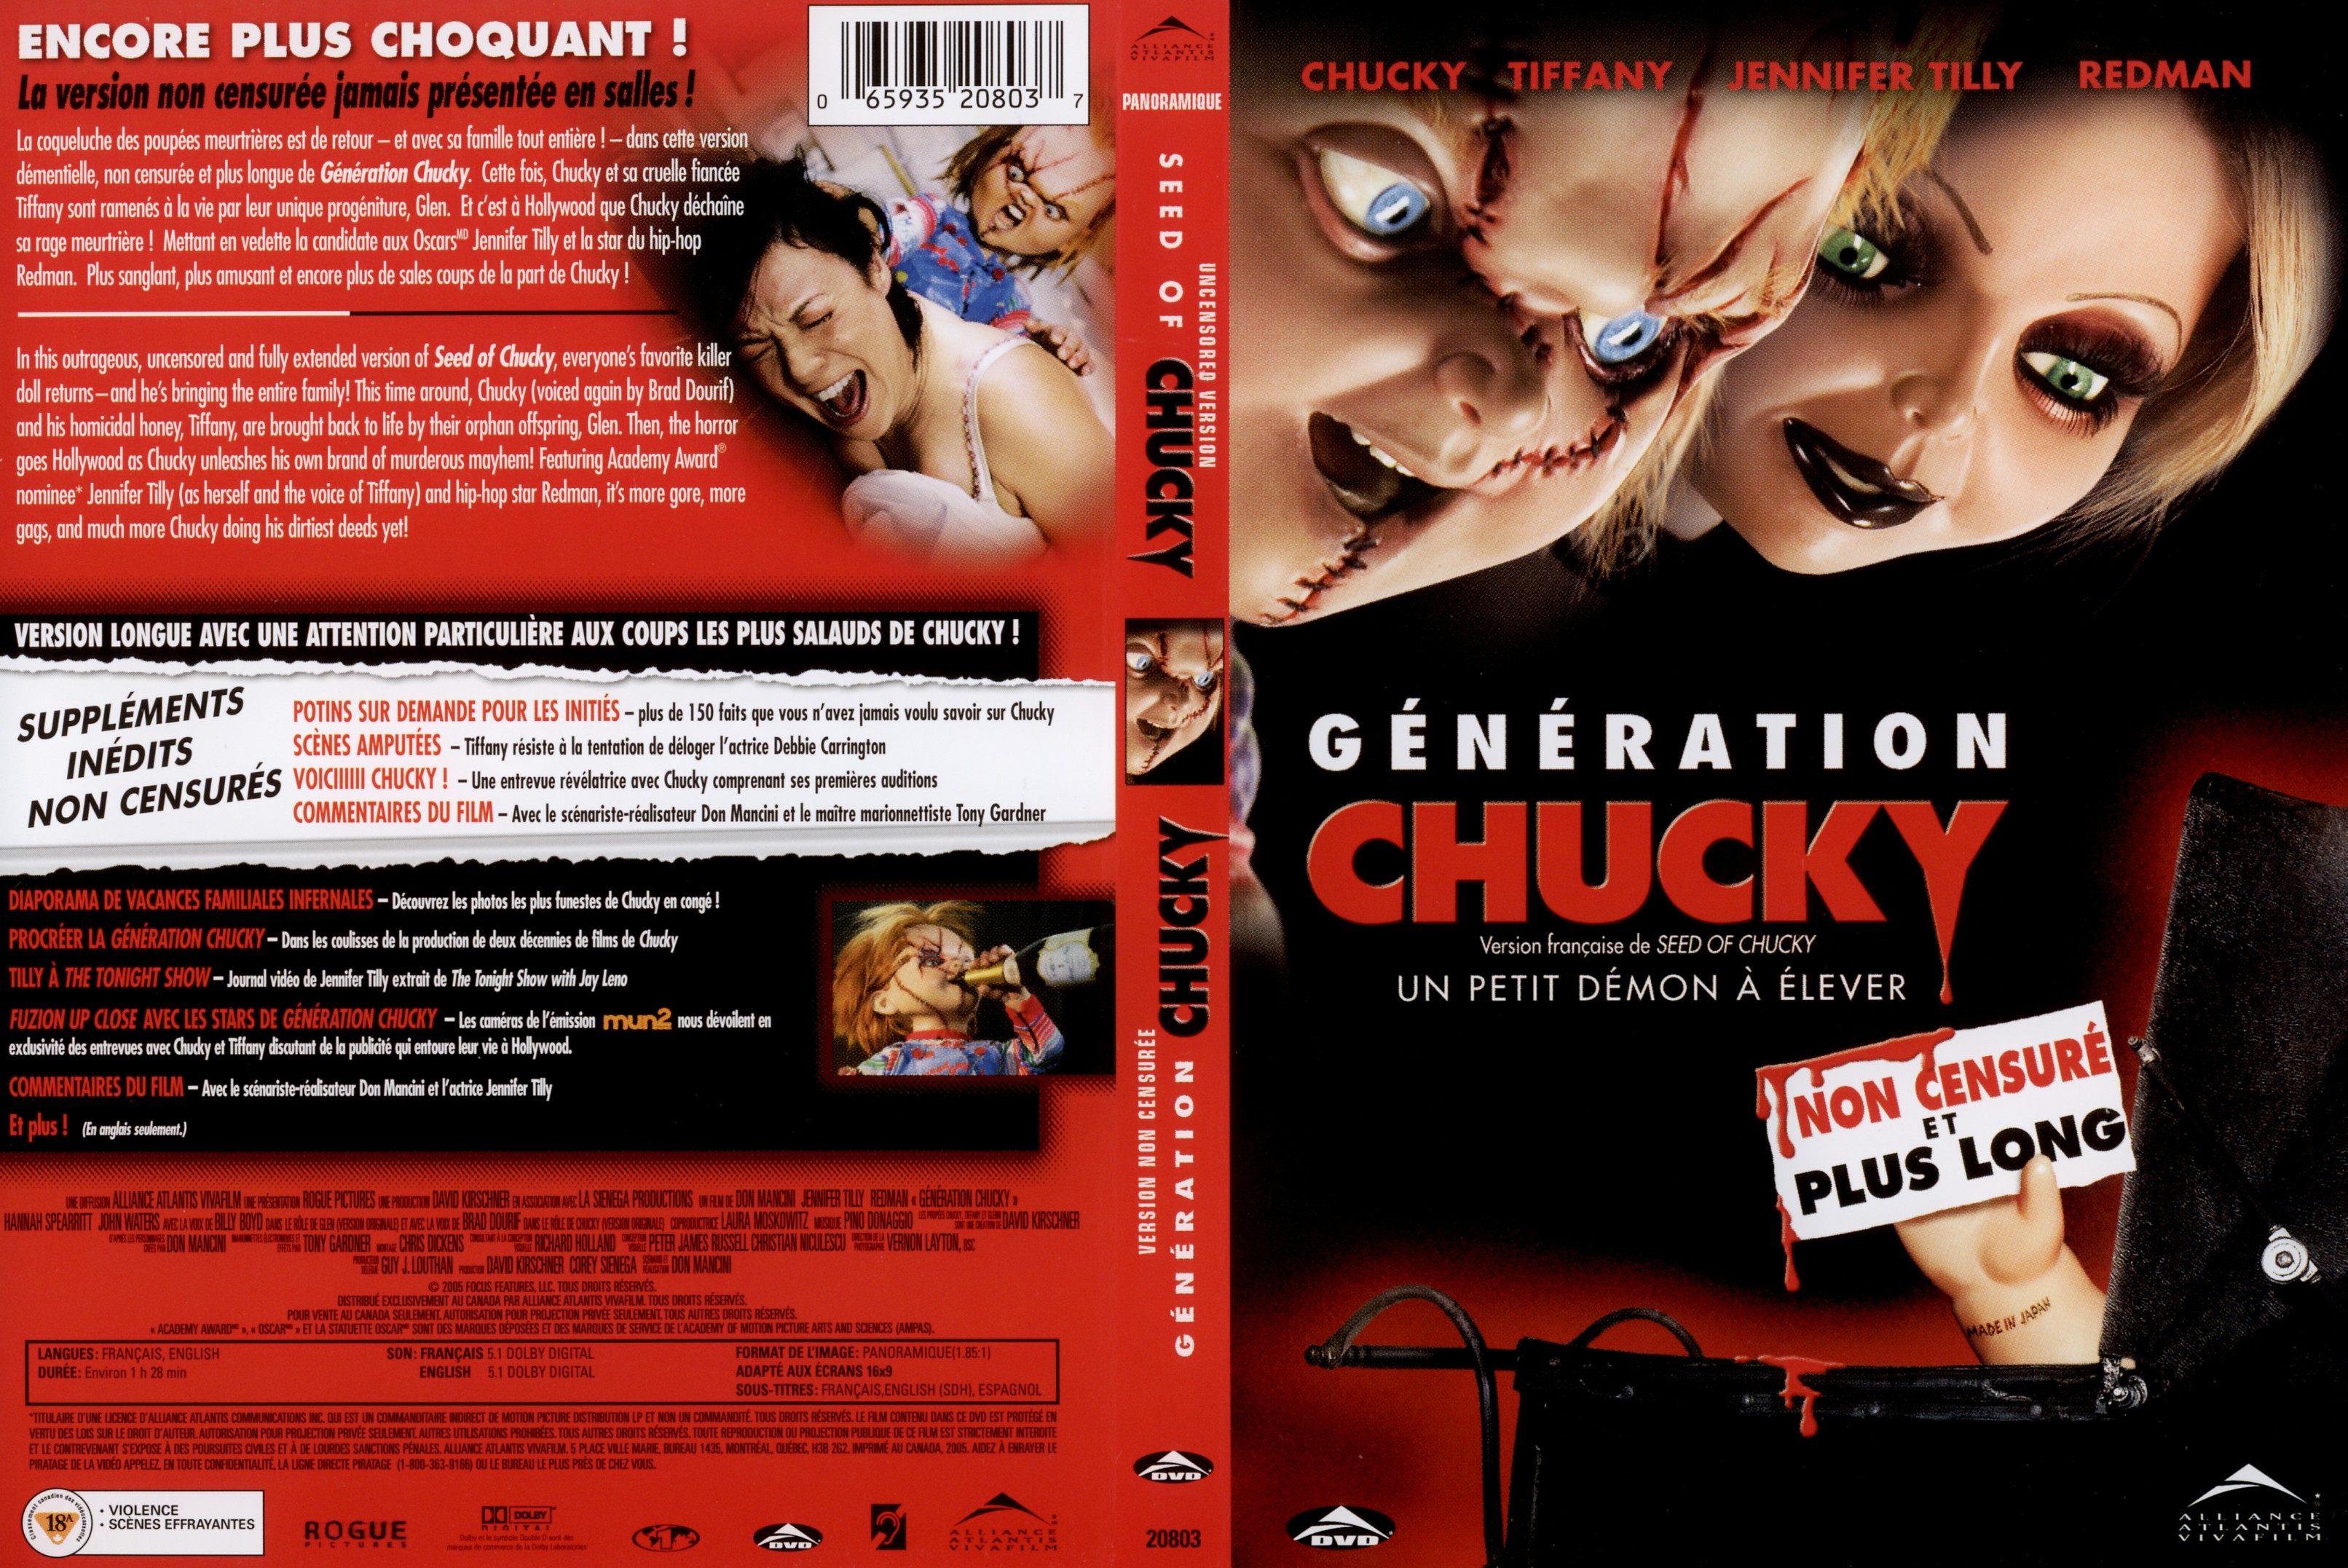 Jaquette DVD Gnration Chucky